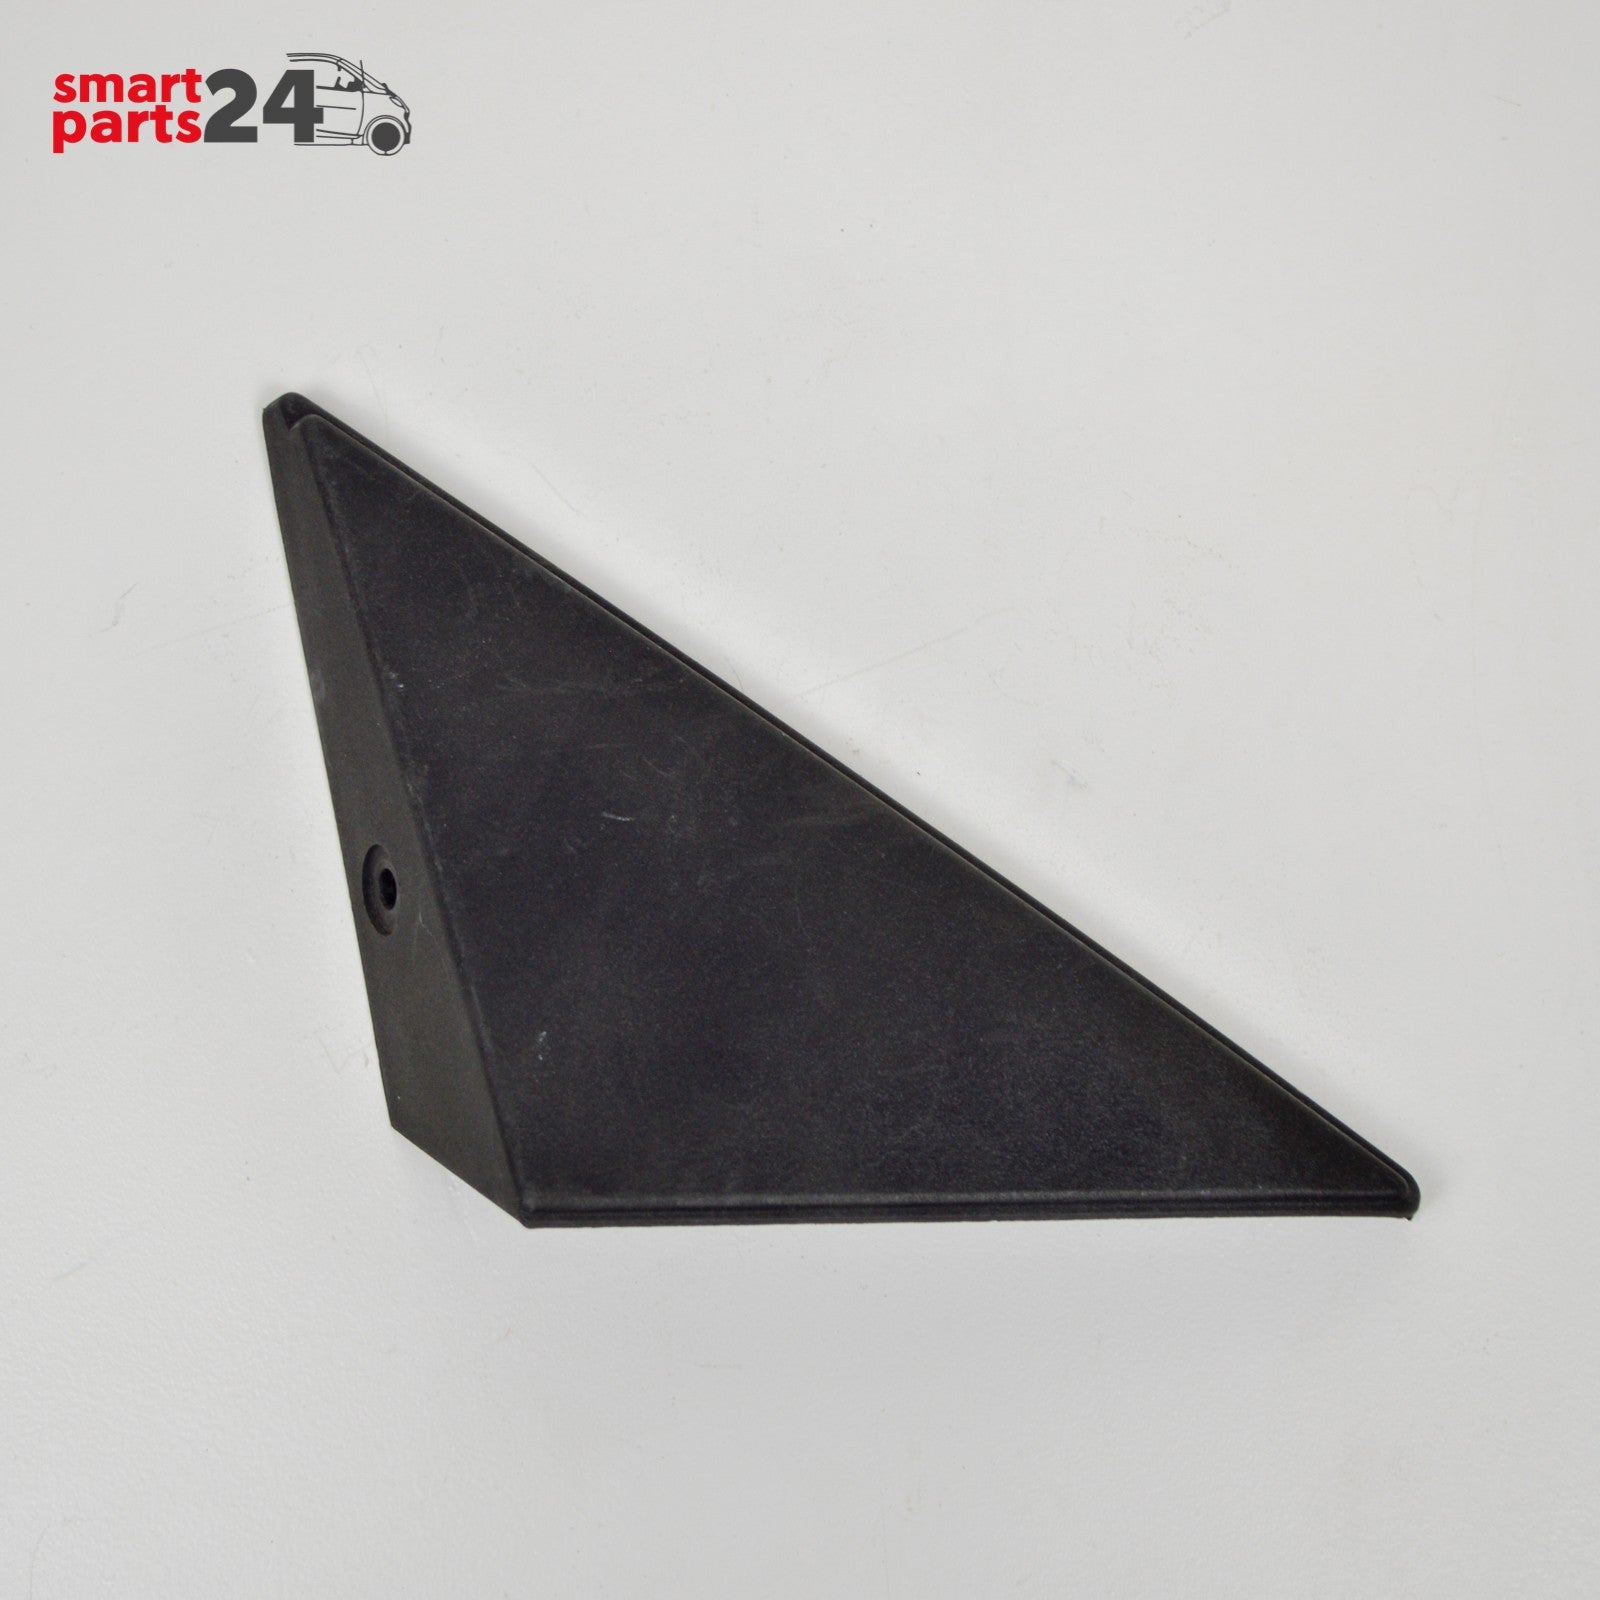 Smart Fortwo 450 mirror triangle outside mirror right 0000982V008 (used)